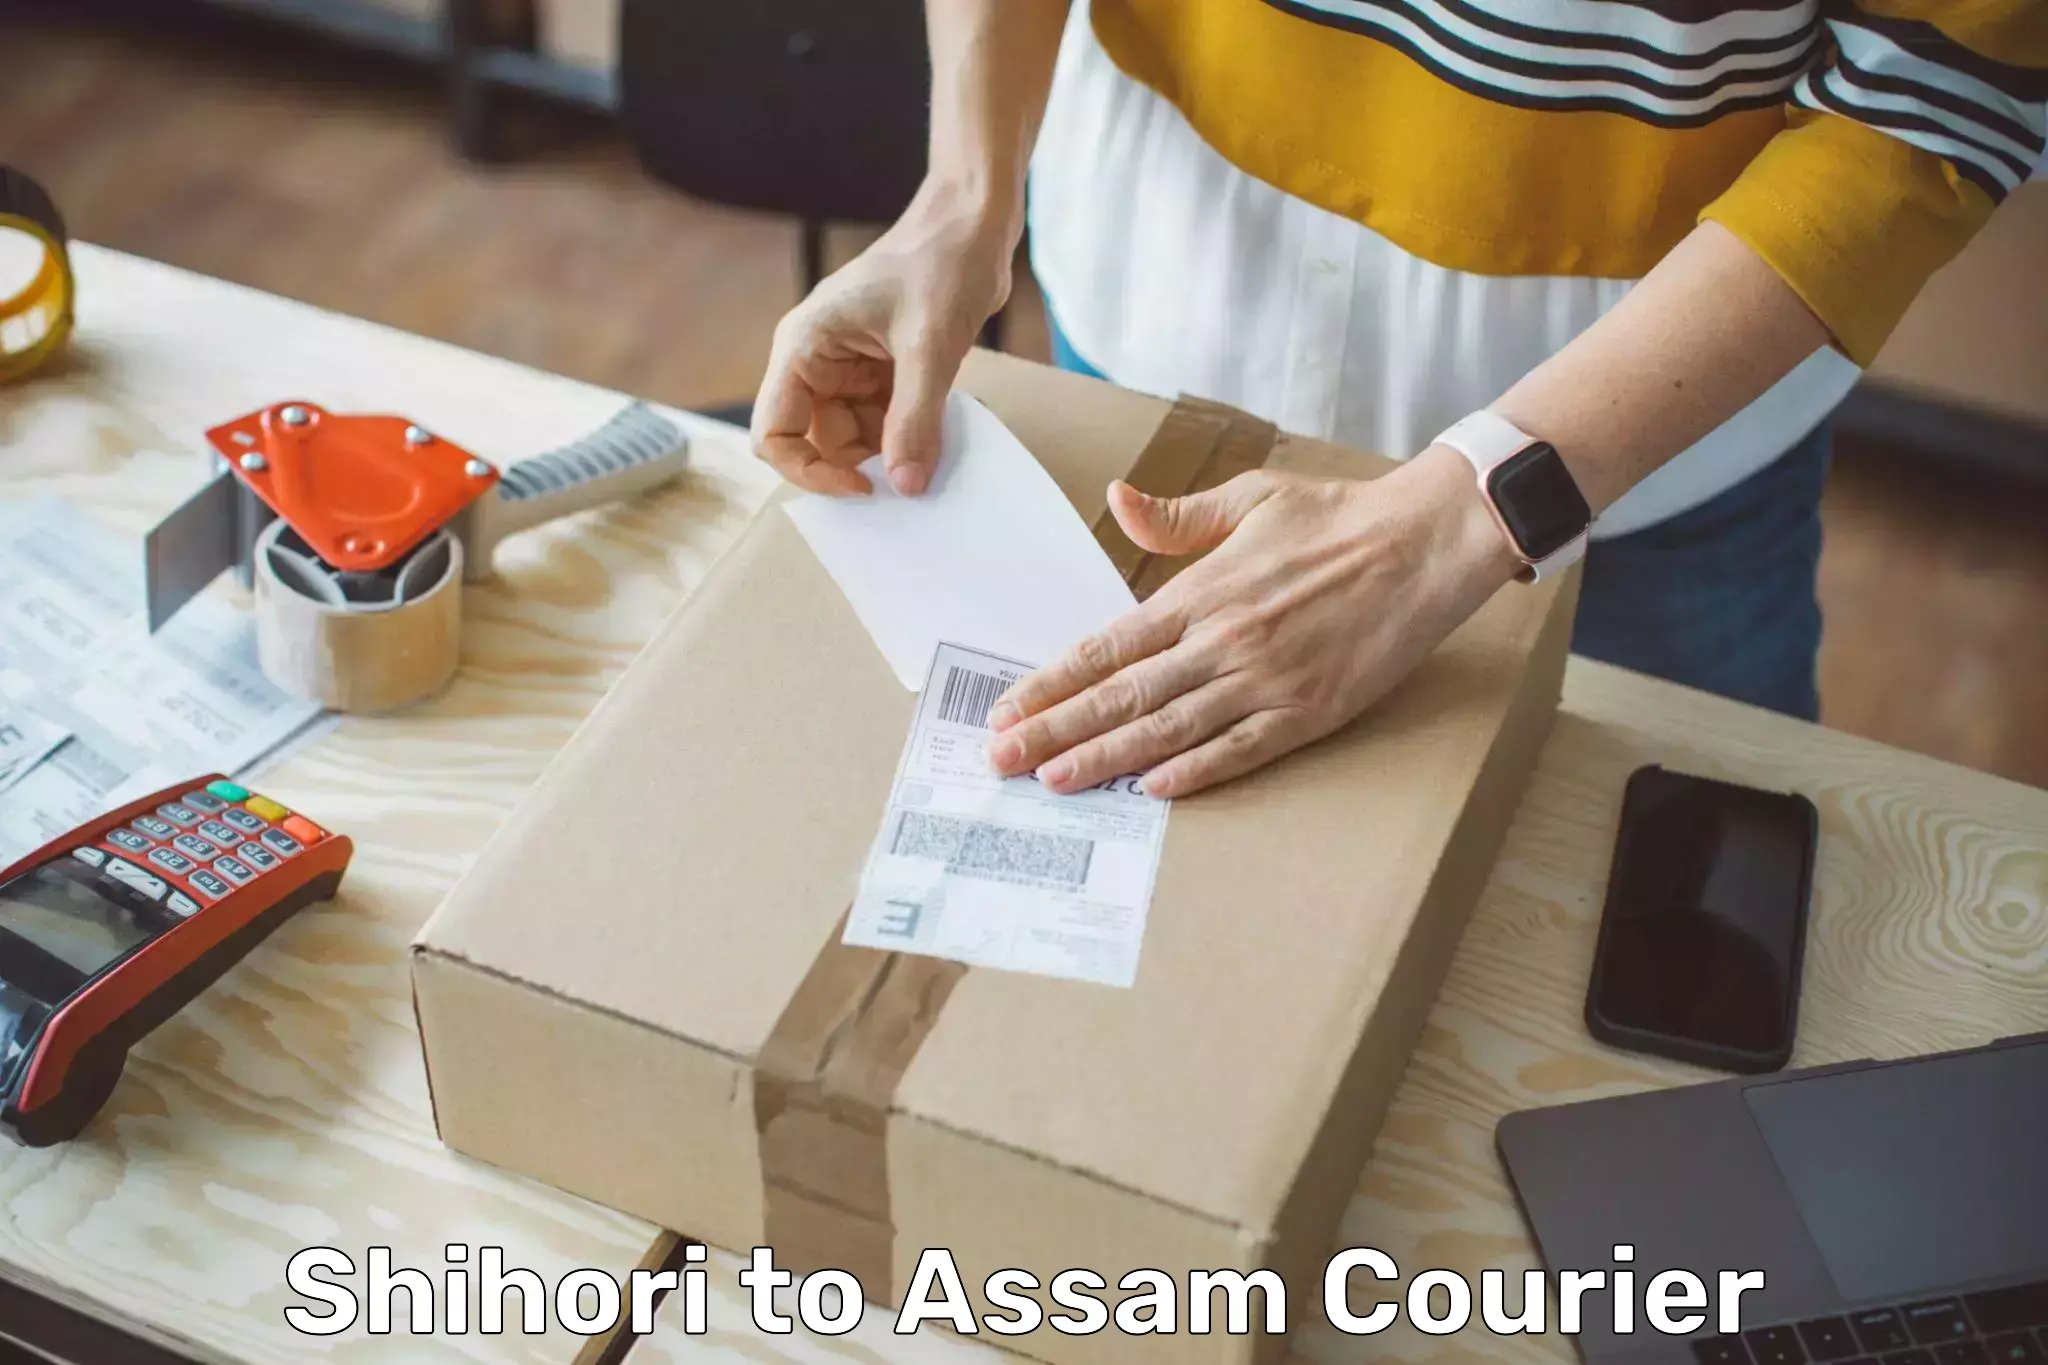 Bulk courier orders in Shihori to Assam